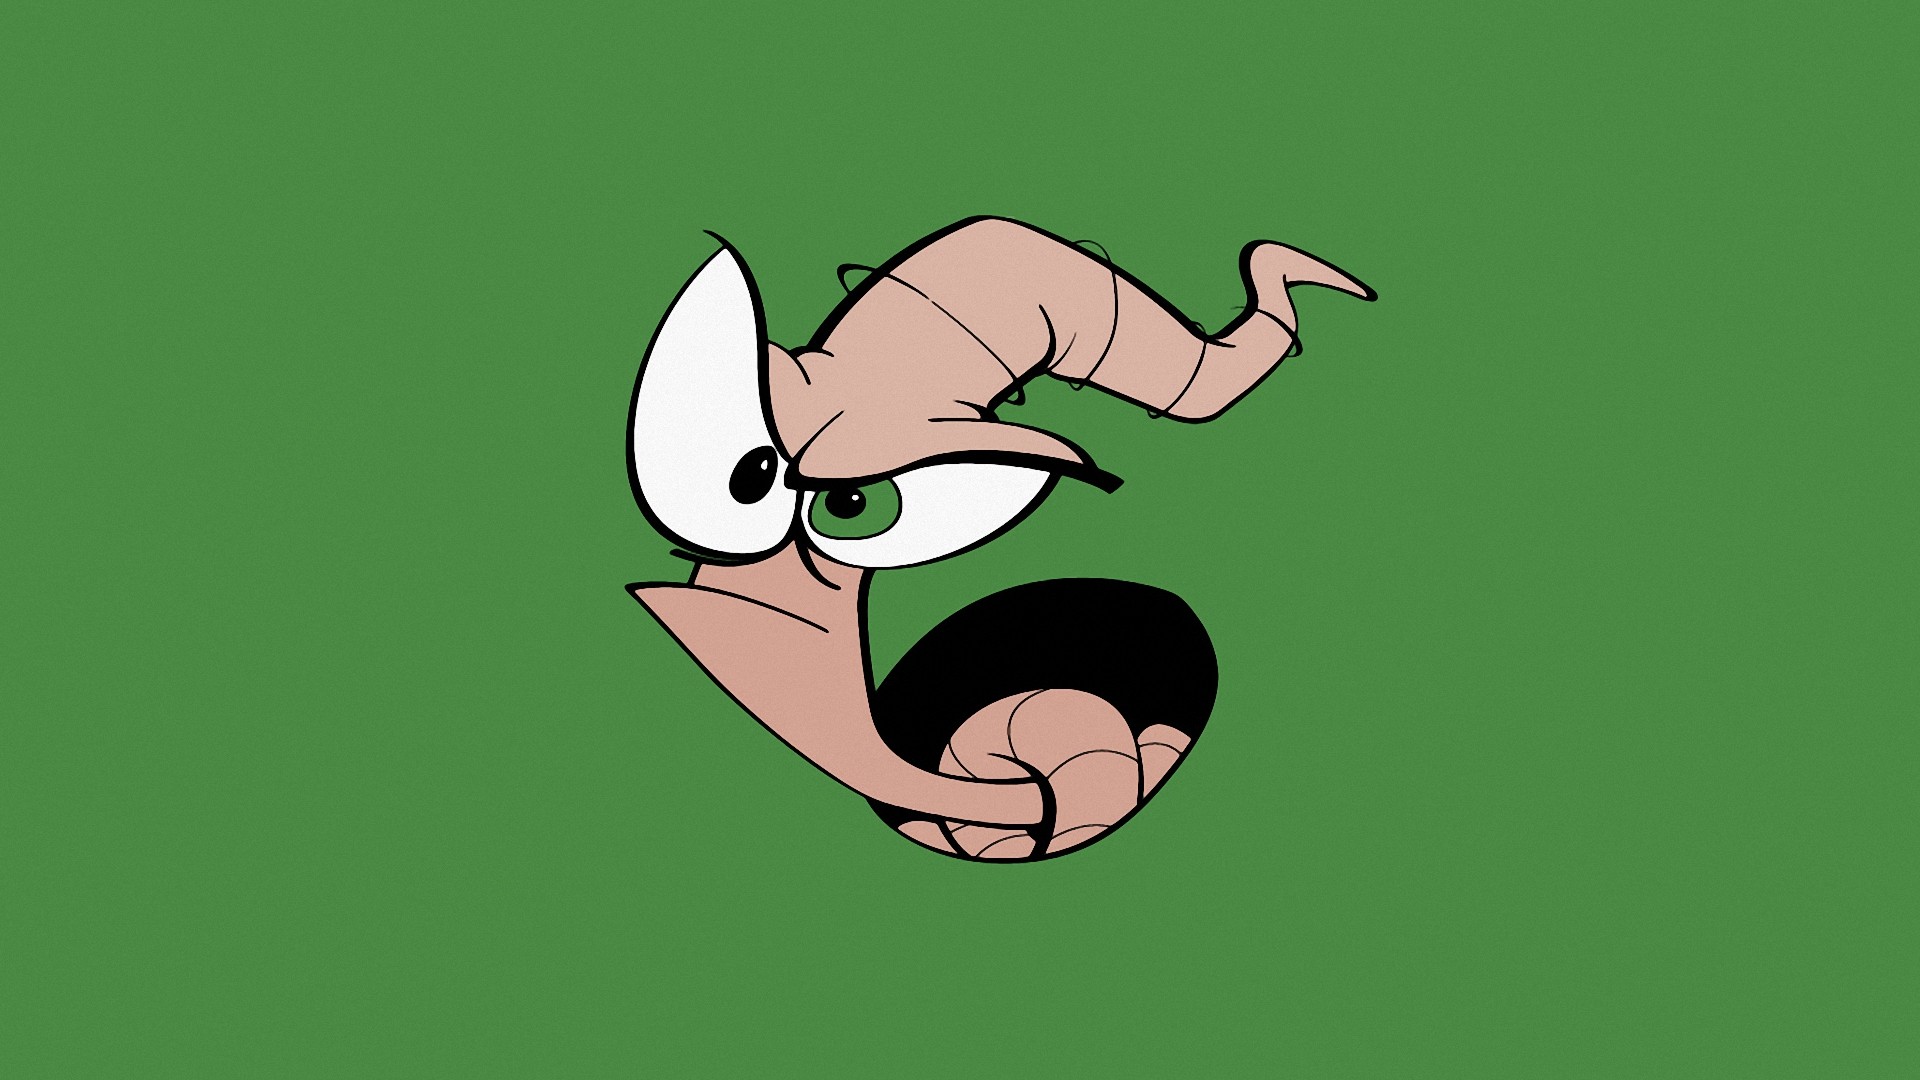 General 1920x1080 Earthworm Jim green background video games video game art simple background